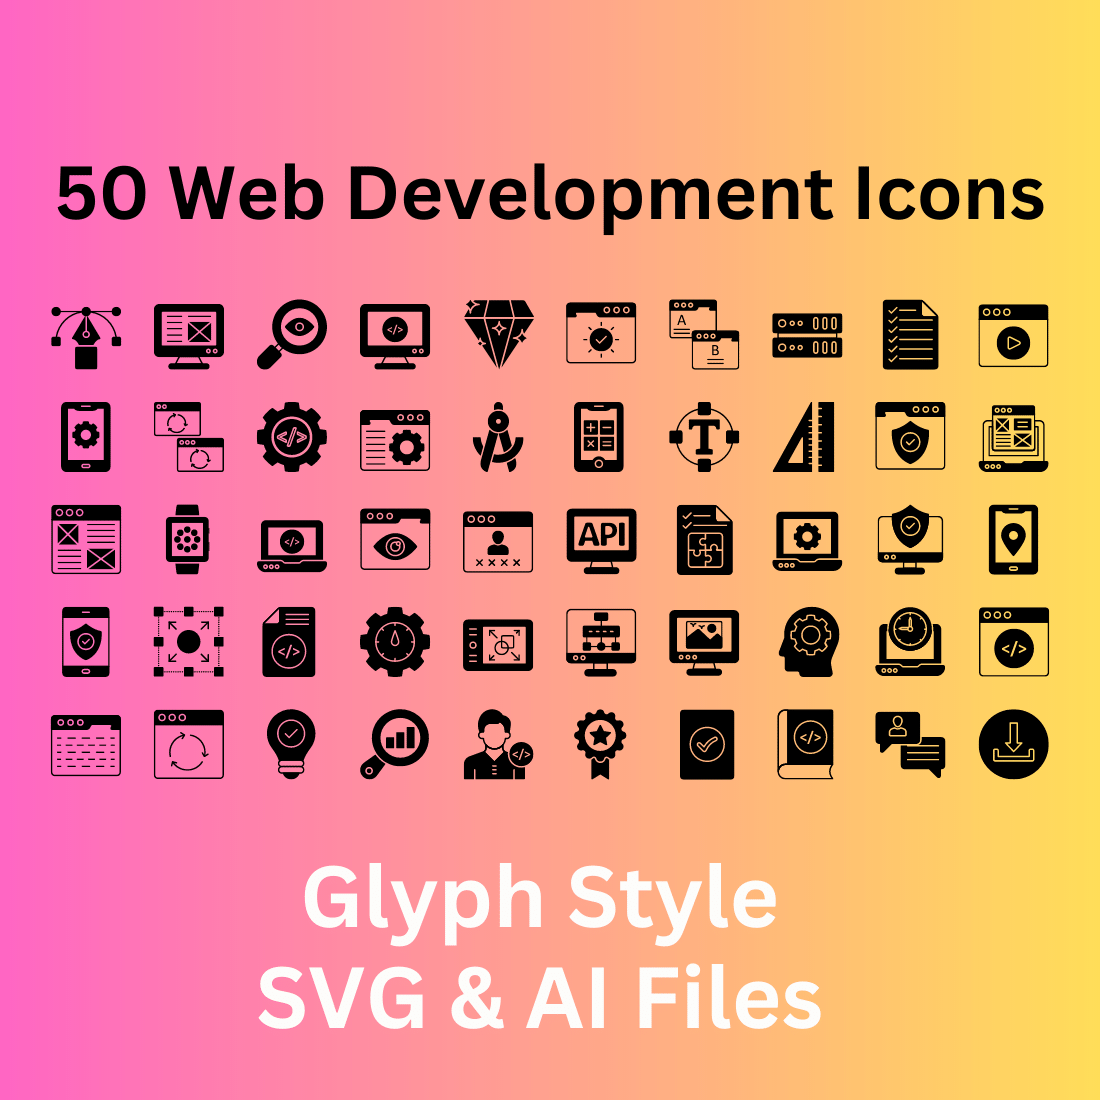 Web Development Icon Set 50 Glyph Icons - SVG And AI Files cover image.